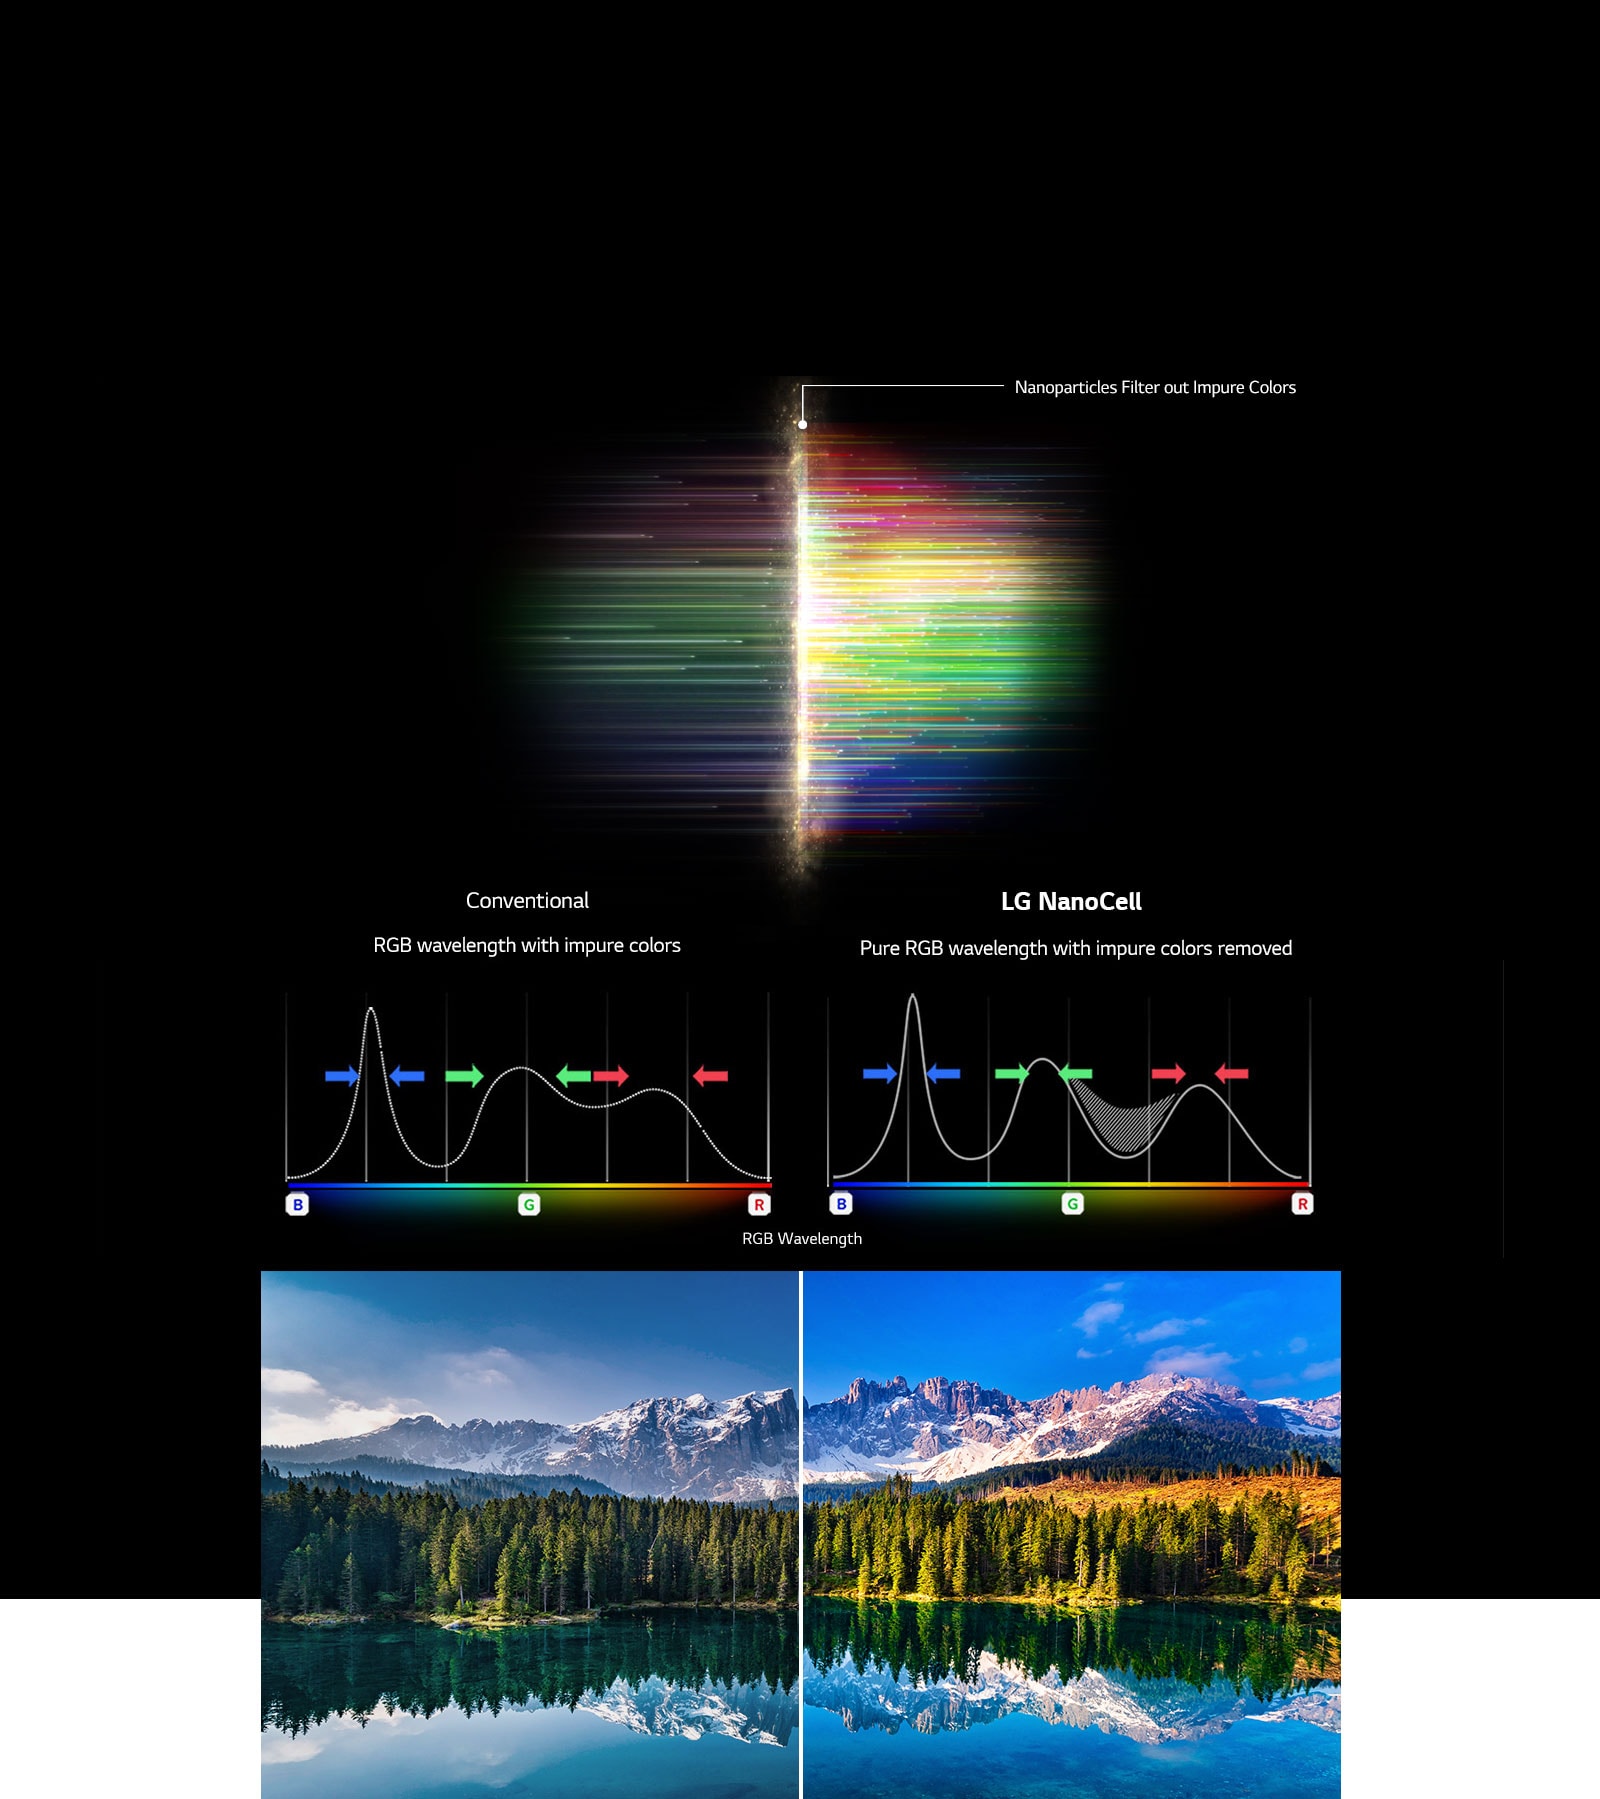 The RGB spectrum graph that showing filter out dull colors and images Comparing Color Purity between Conventional and NanoCell Tech